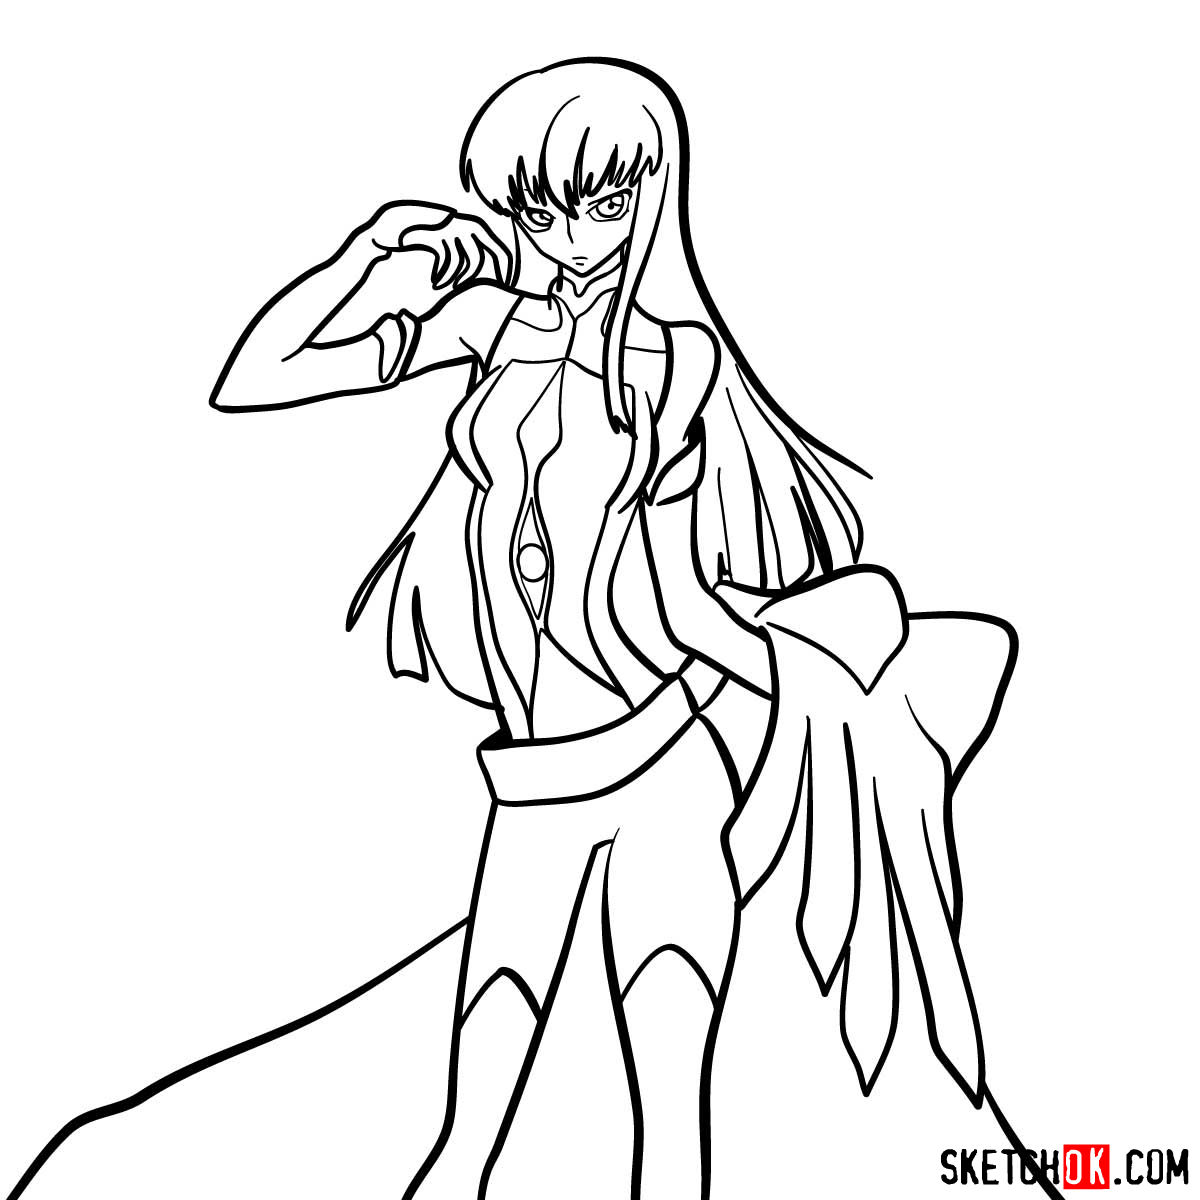 16 steps drawing guide of C.C. from Code Geass anime - step 15